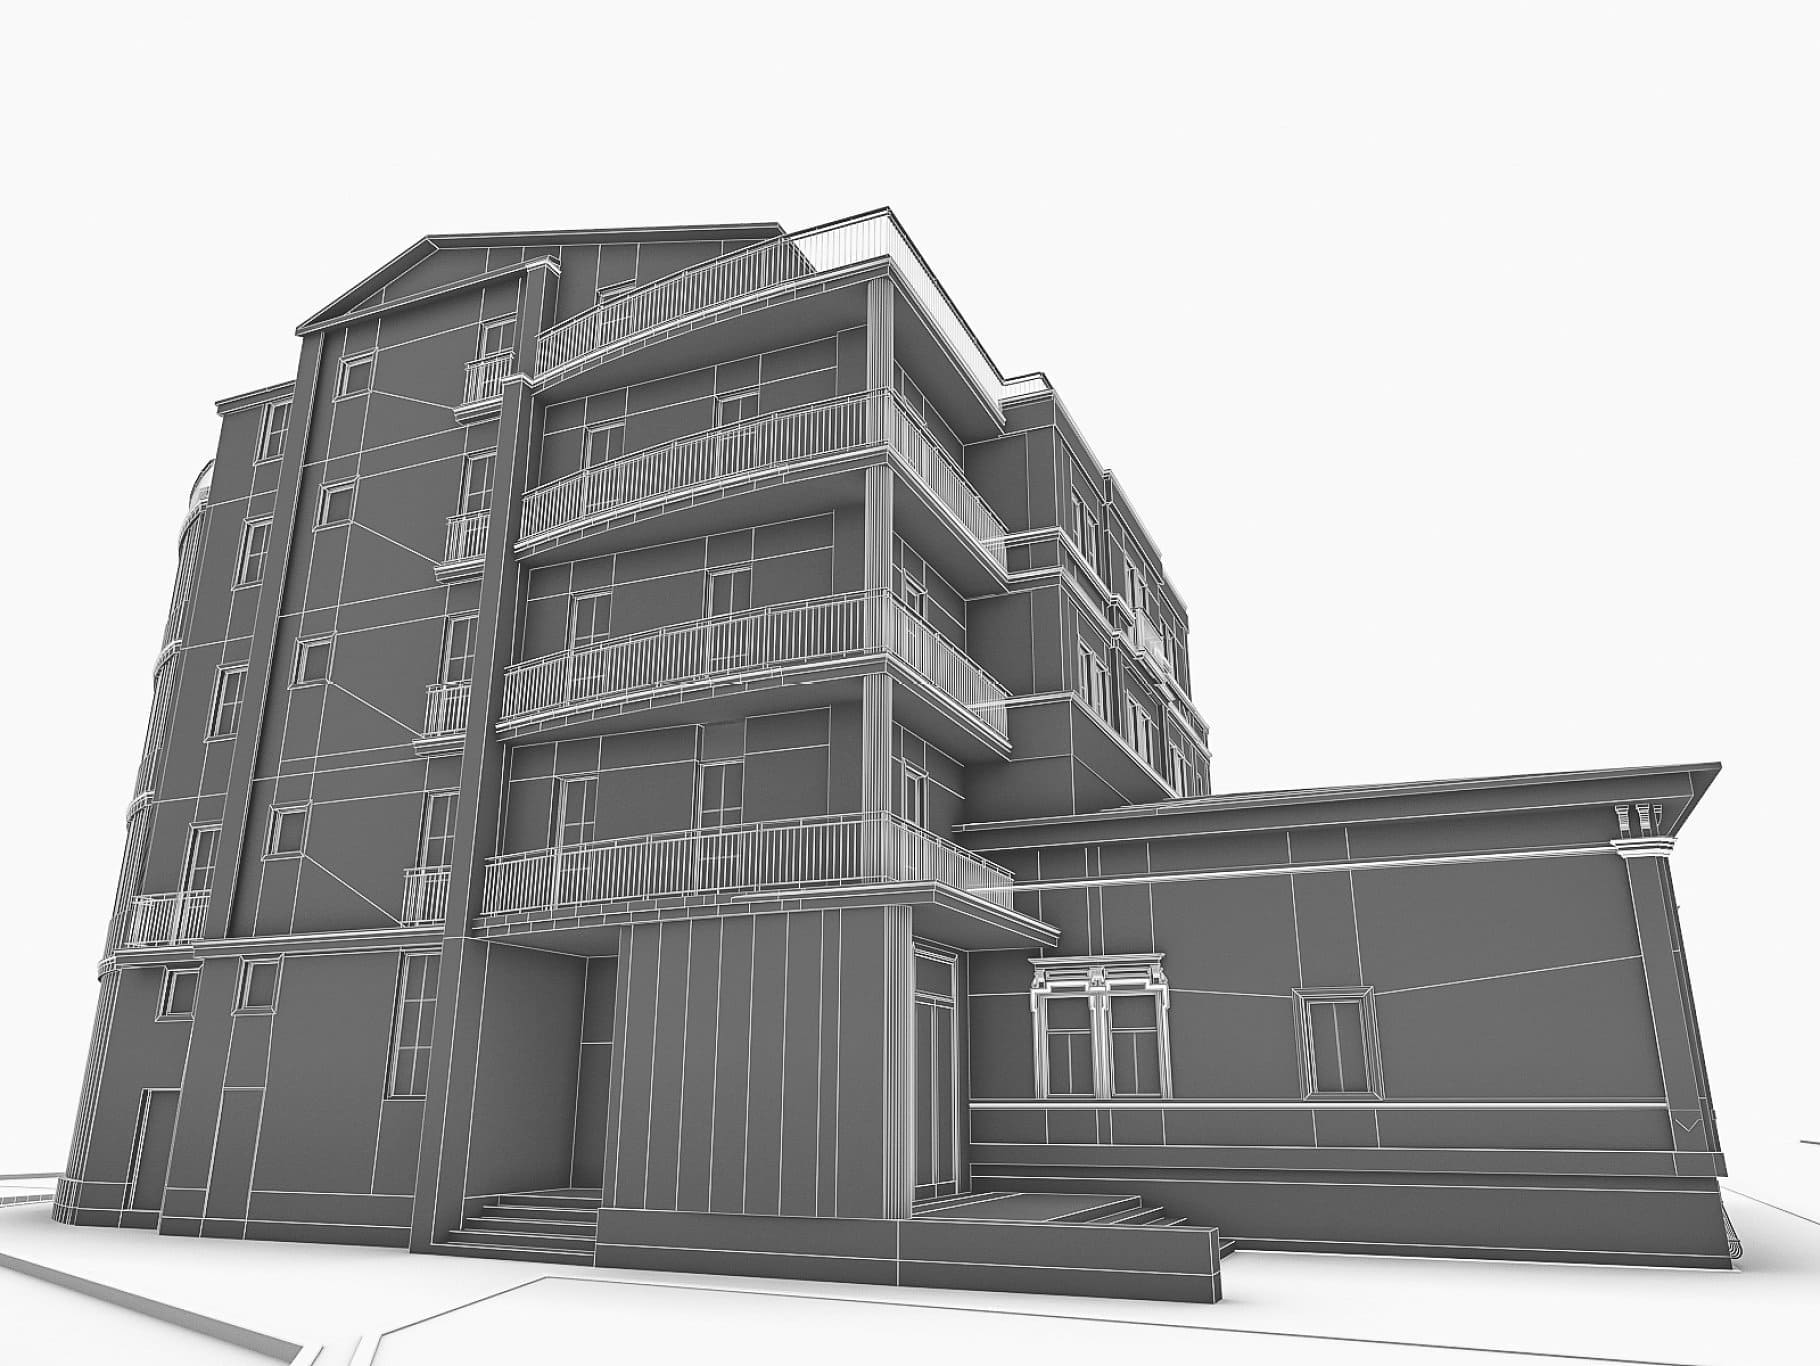 5-story drawing of a house with open balconies.